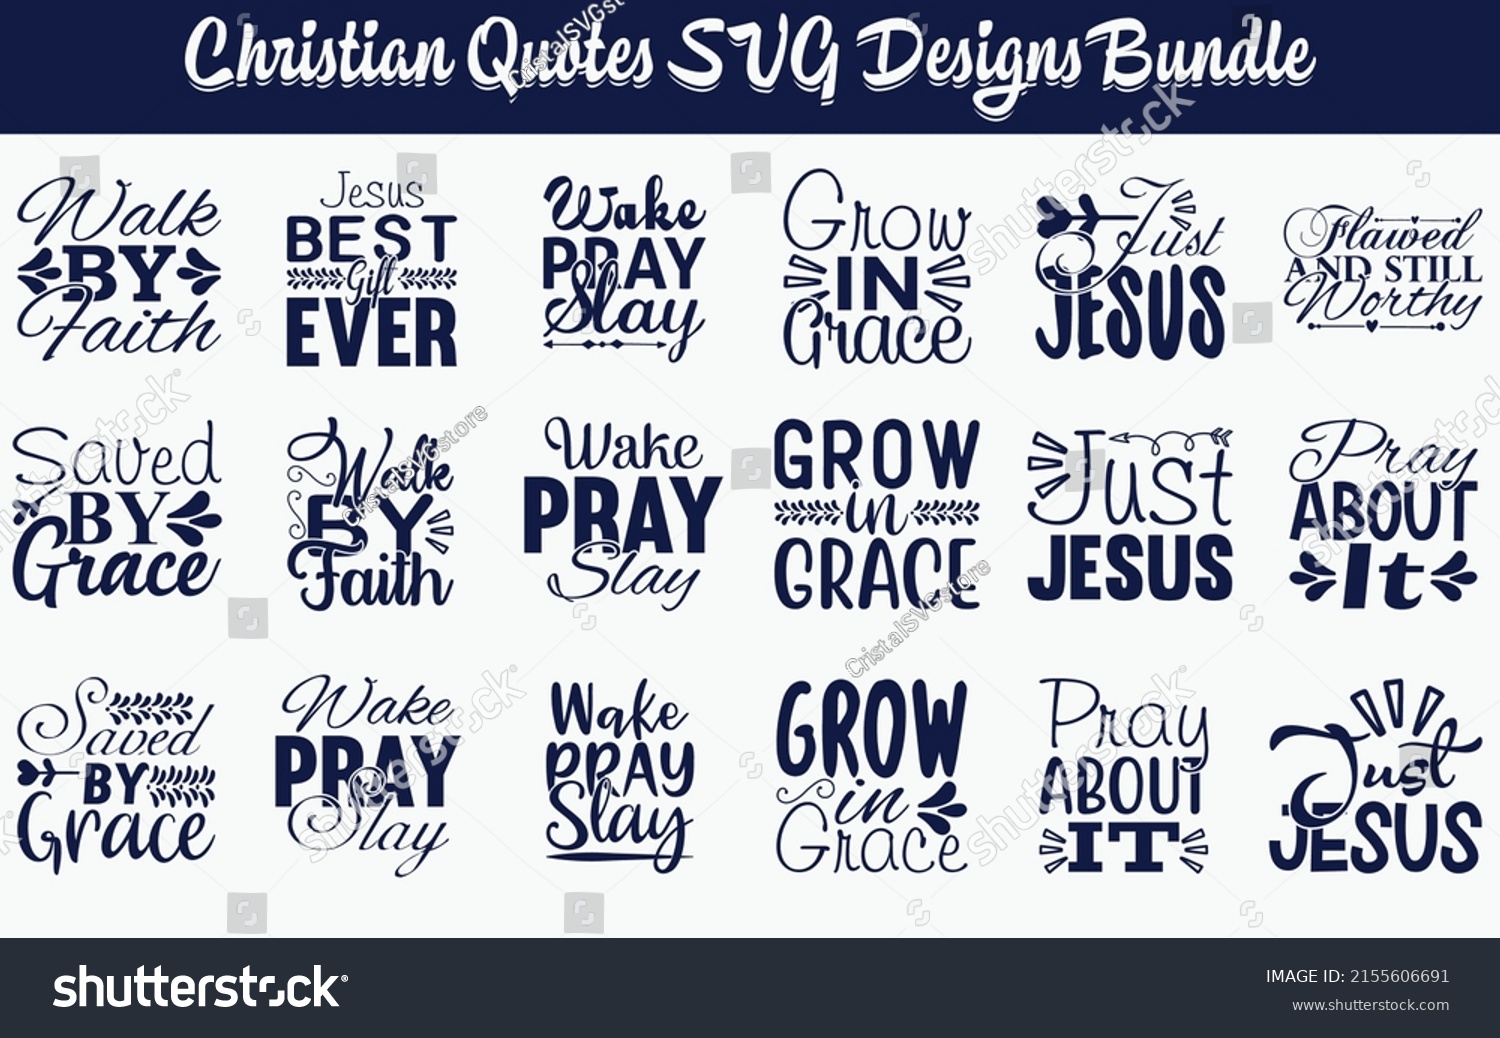 SVG of Christian Quotes SVG Cut Files Designs Bundle, Christian quotes SVG cut files, Christian quotes t shirt designs, Saying about faithful, faithful cut files, religious quotes eps files, Saying of godly svg